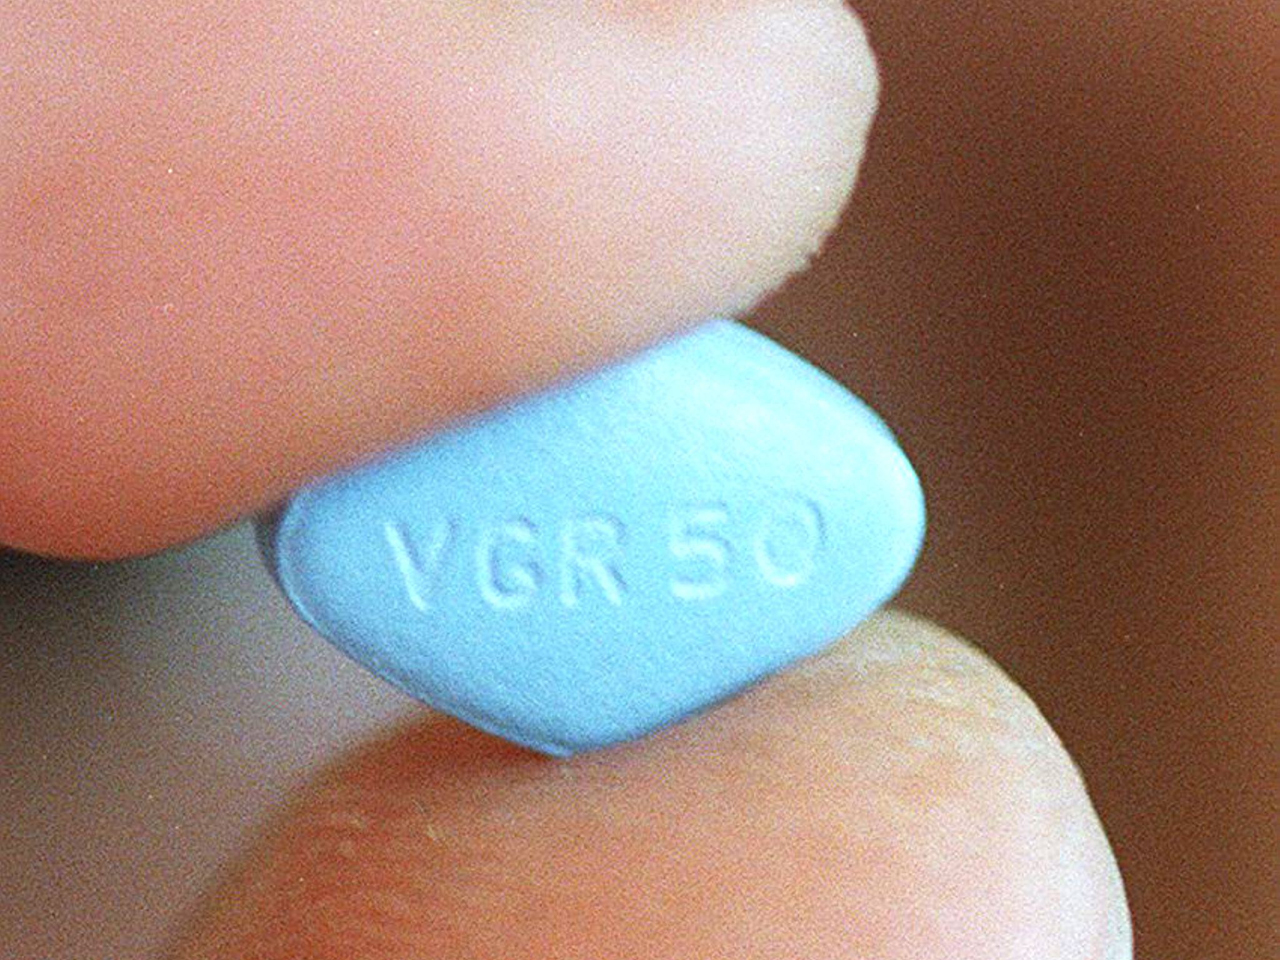 Viagra for women? ED treatment may help with menstrual cramps CBS News